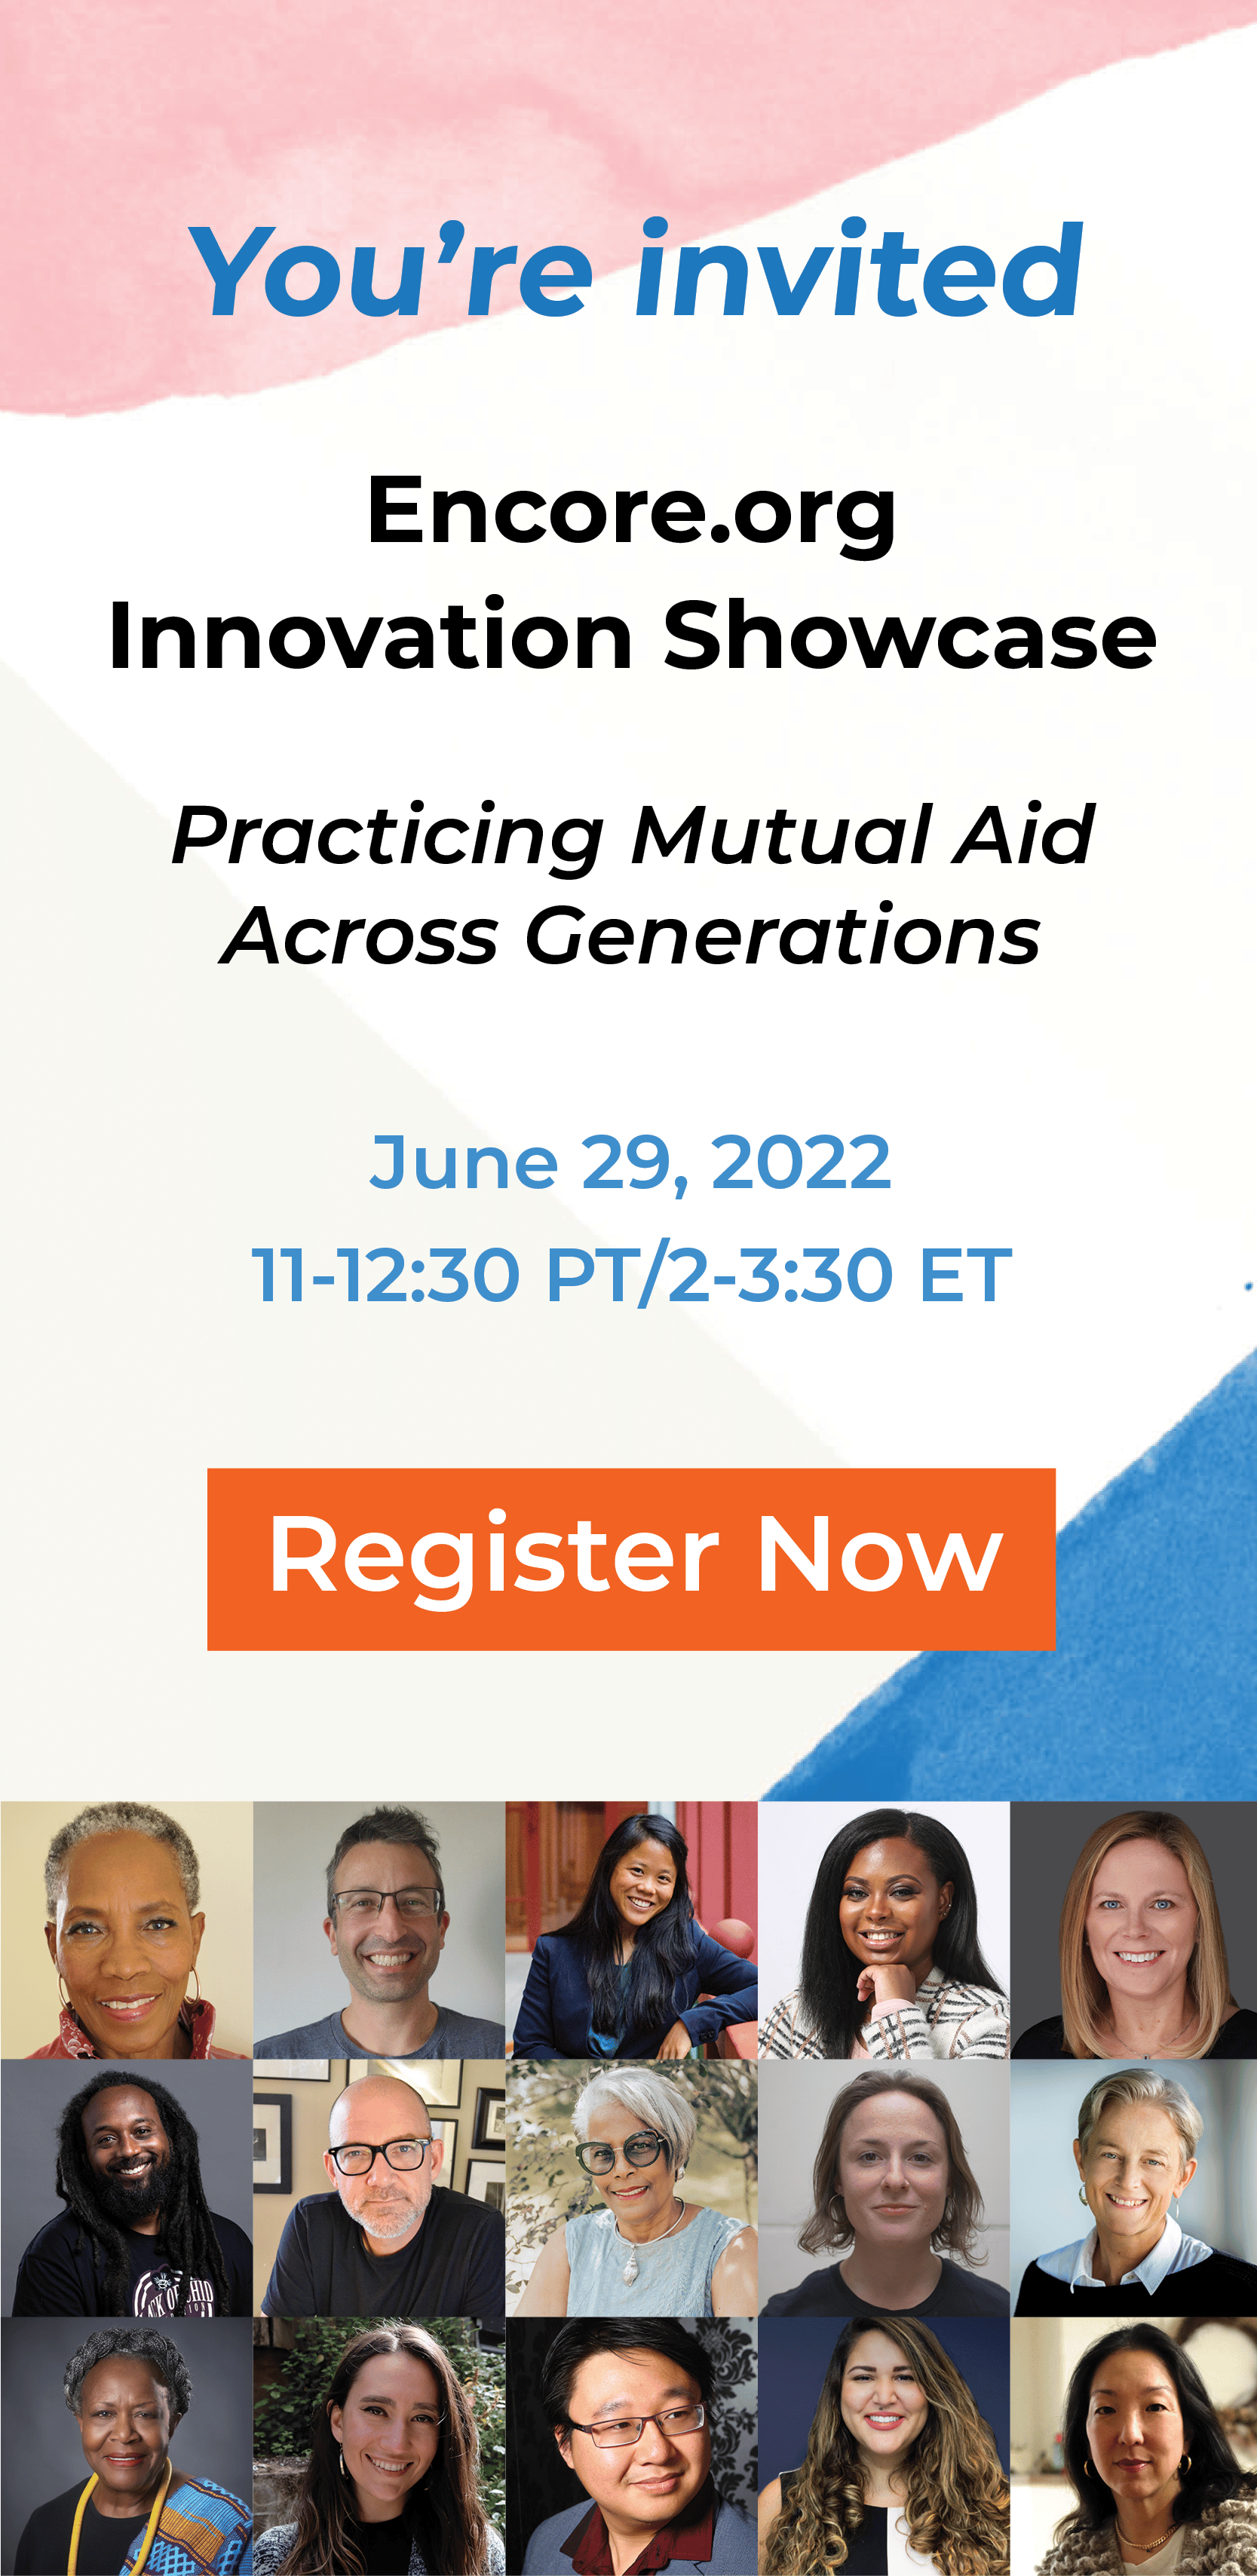 Colorful image featuring watercolor splashes and the prominent text reading: "You're Invited: Encore.org Innovation showcase: Practicing Mutual Aid Across Generations. June 29, 2022. 11-12:30 PT/2-2:30 ET. Register now." The image links to the registration page for the event.